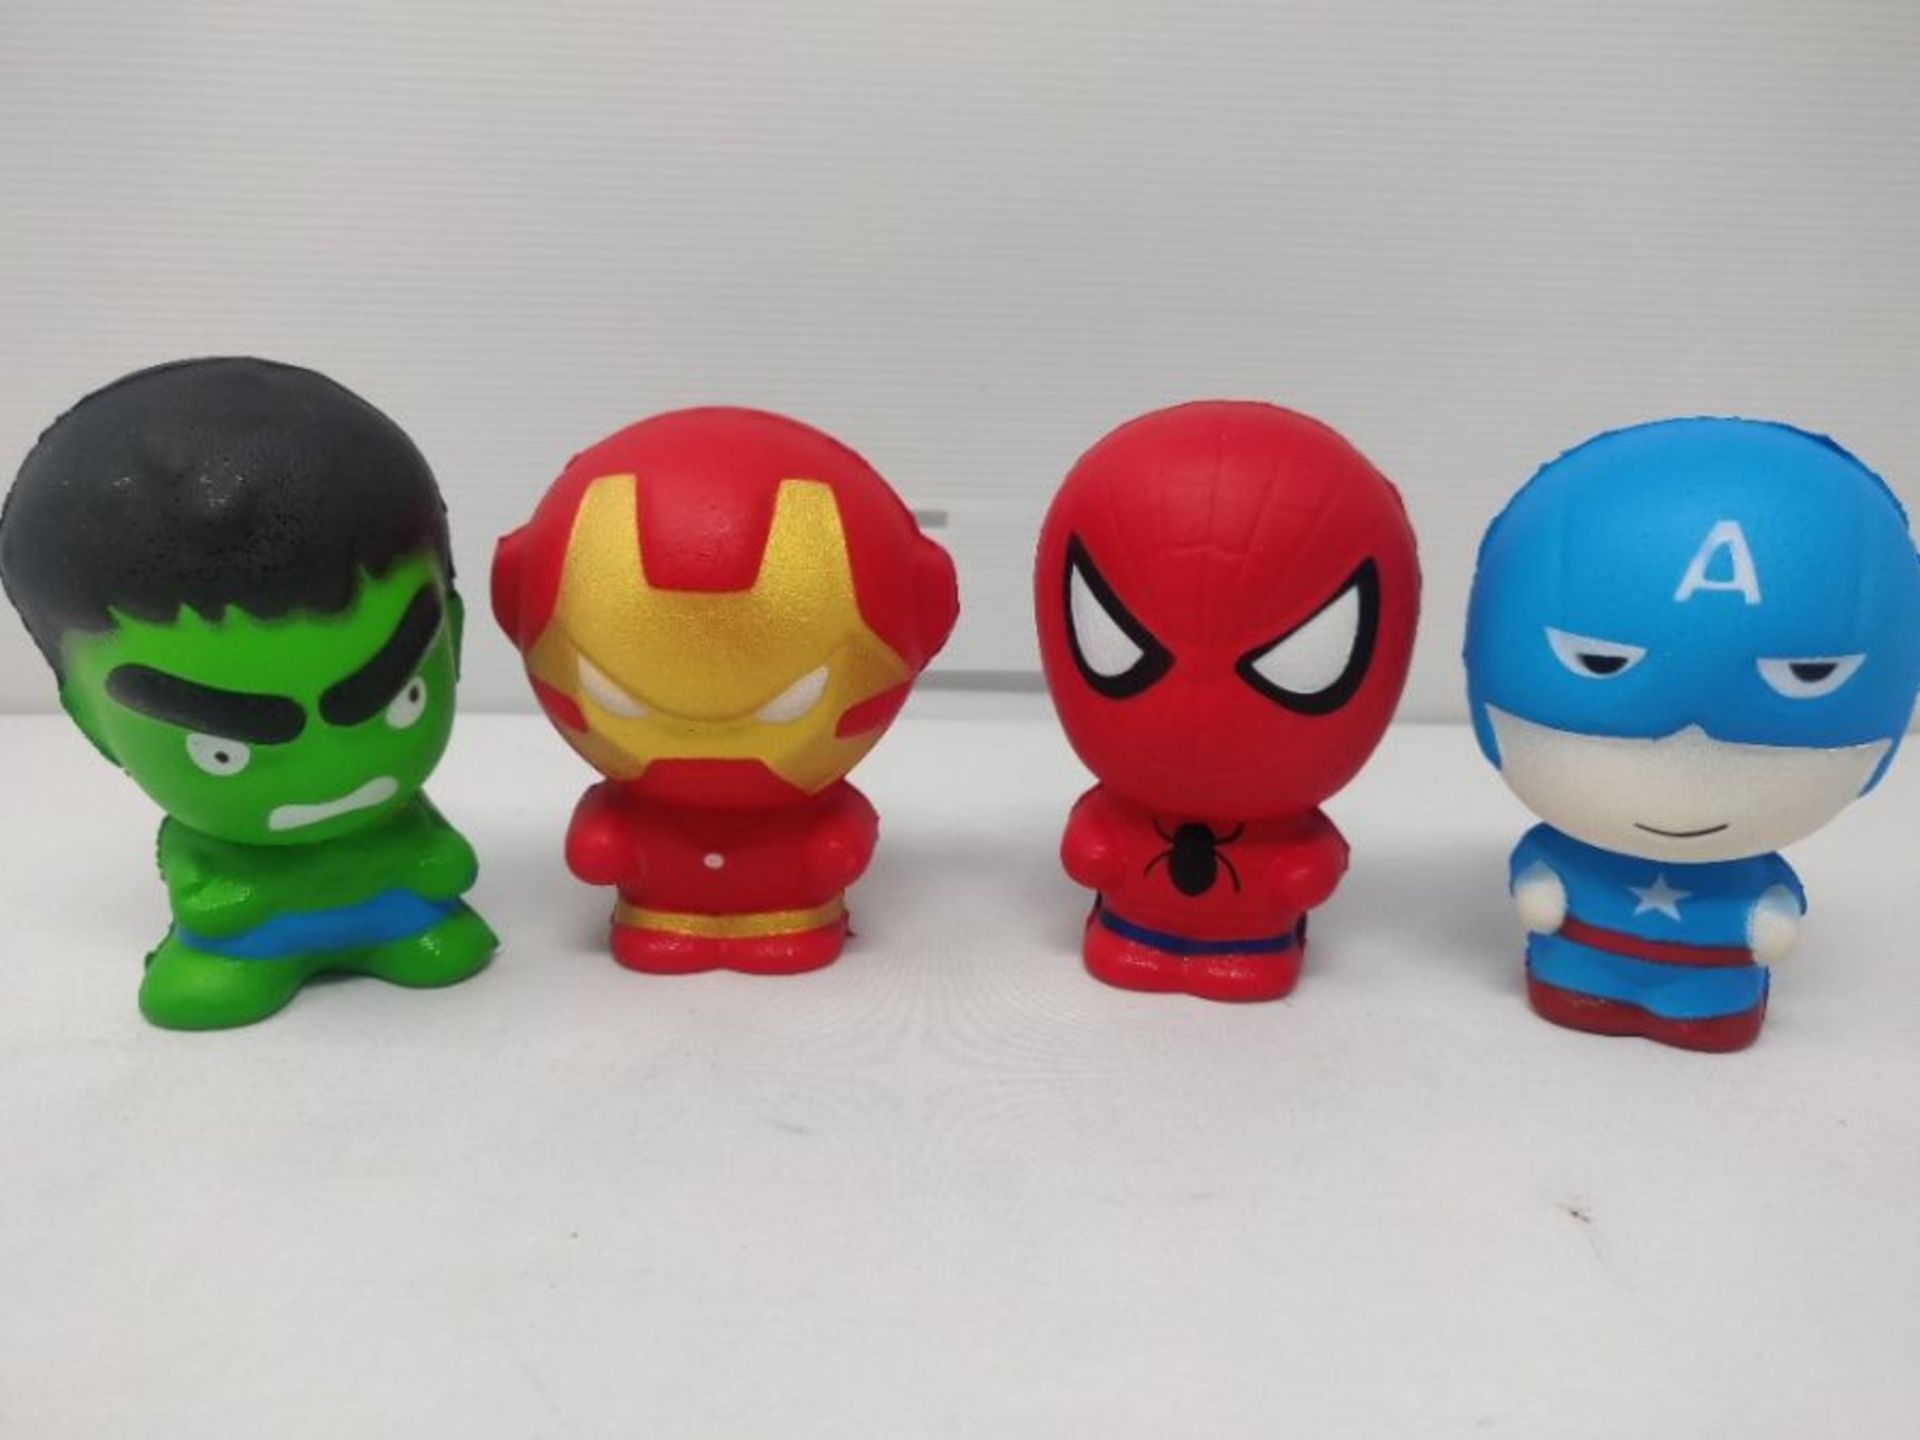 BKT Perform Marvel Superhero Toy Squishies Gift Film Characters Squishy 4 Pack Large S - Image 2 of 2